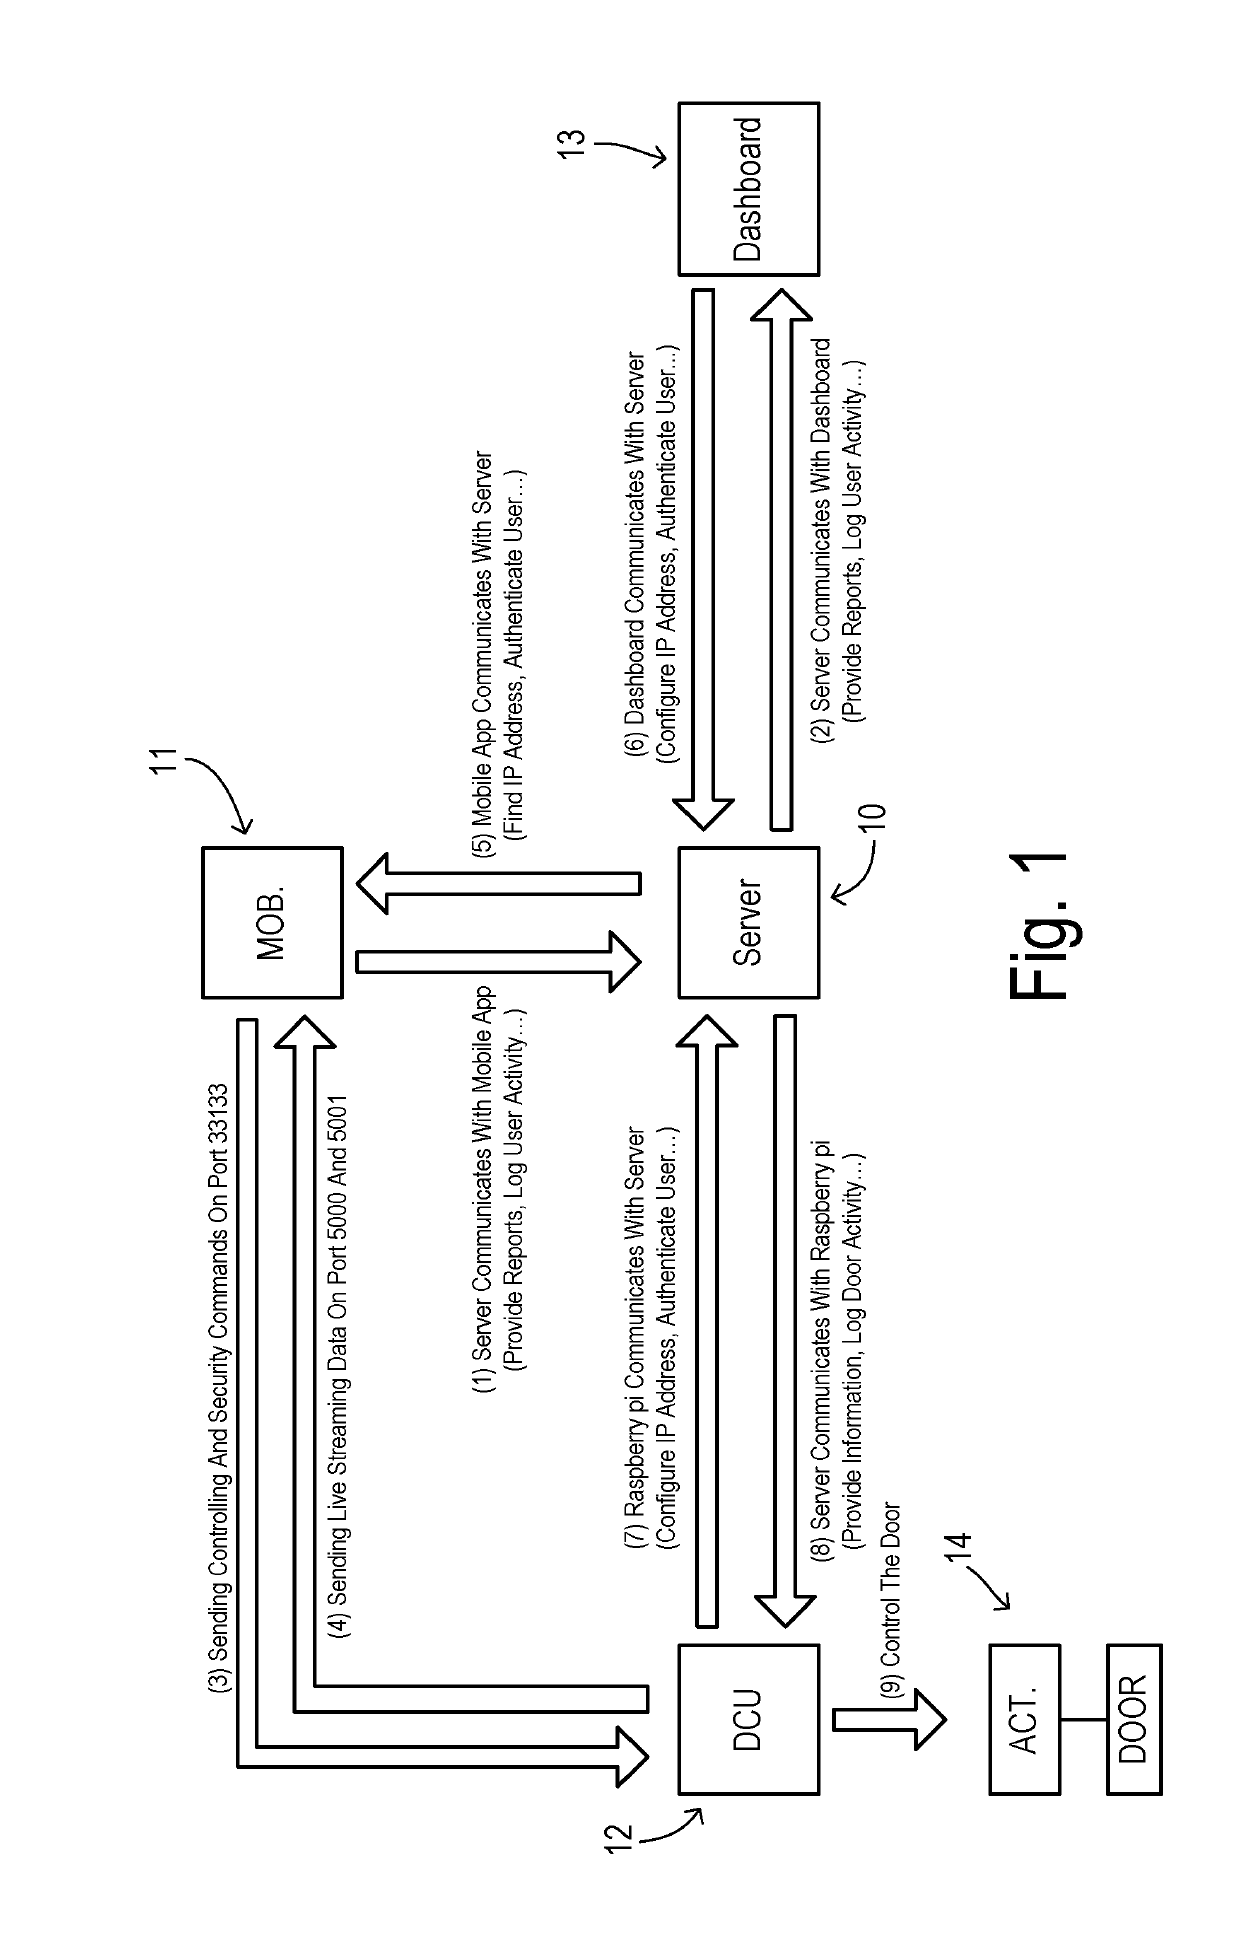 Internet-based remote control and monitoring system for commercial doors using mobile devices